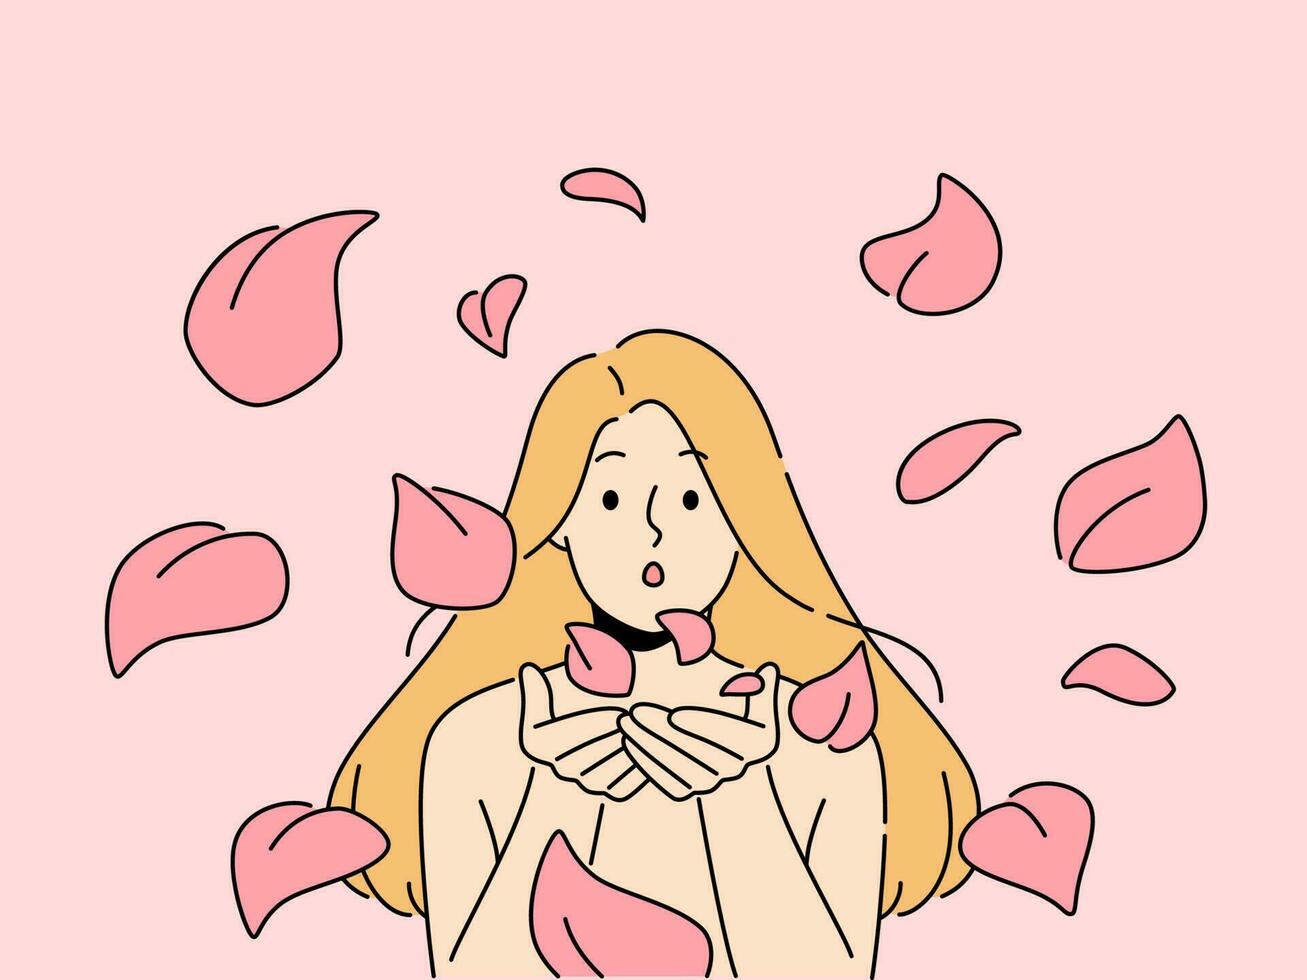 Naked woman blow rose petals to camera. Elegant blonde girl spread scent of flowers blowing petals. Vector illustration.